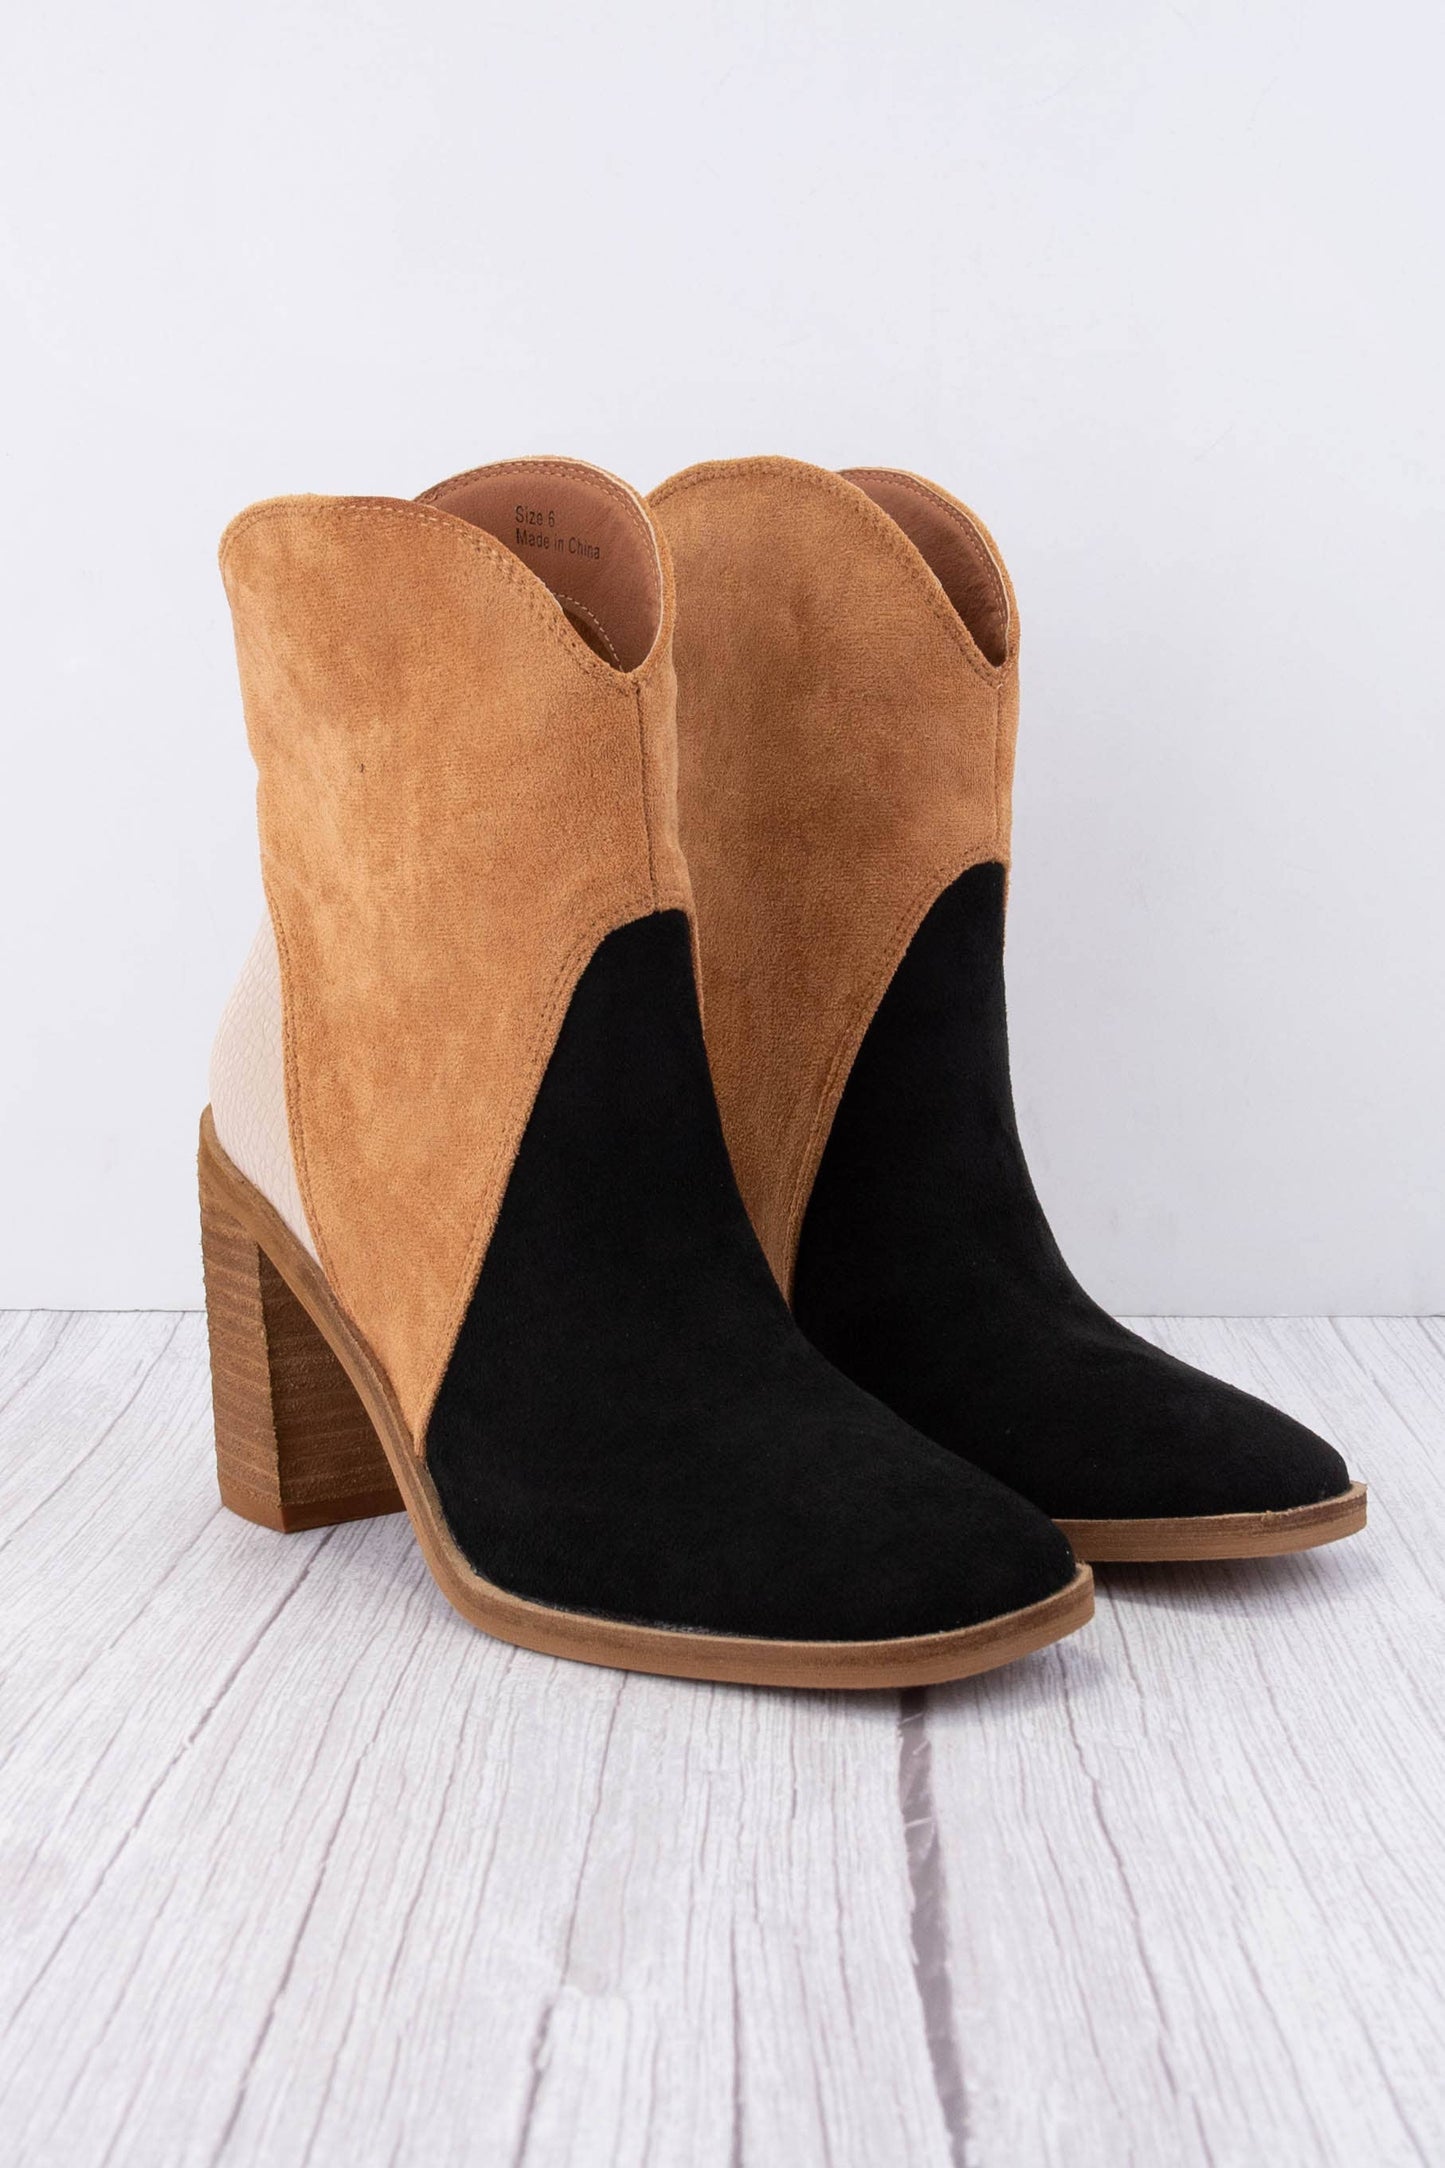 KENDALL SQUARE-TOE ANKLE BOOTS: BLACK/CAMEL/TAUPE CROC